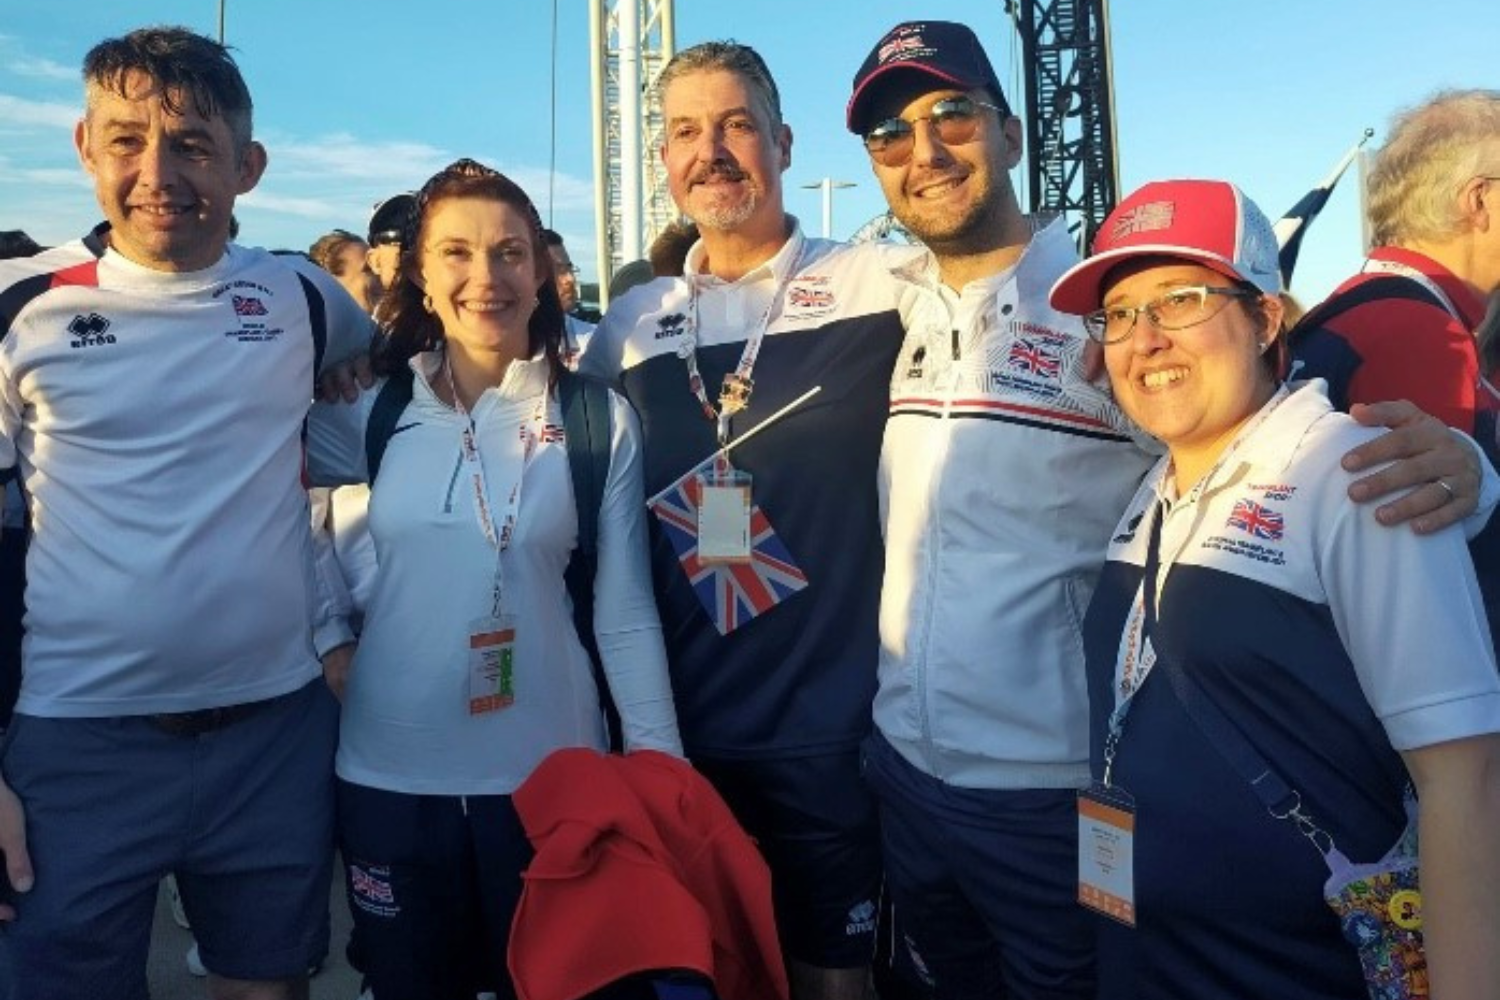 Five World Transplant Games participants standing in a group smiling in their Team GB kit